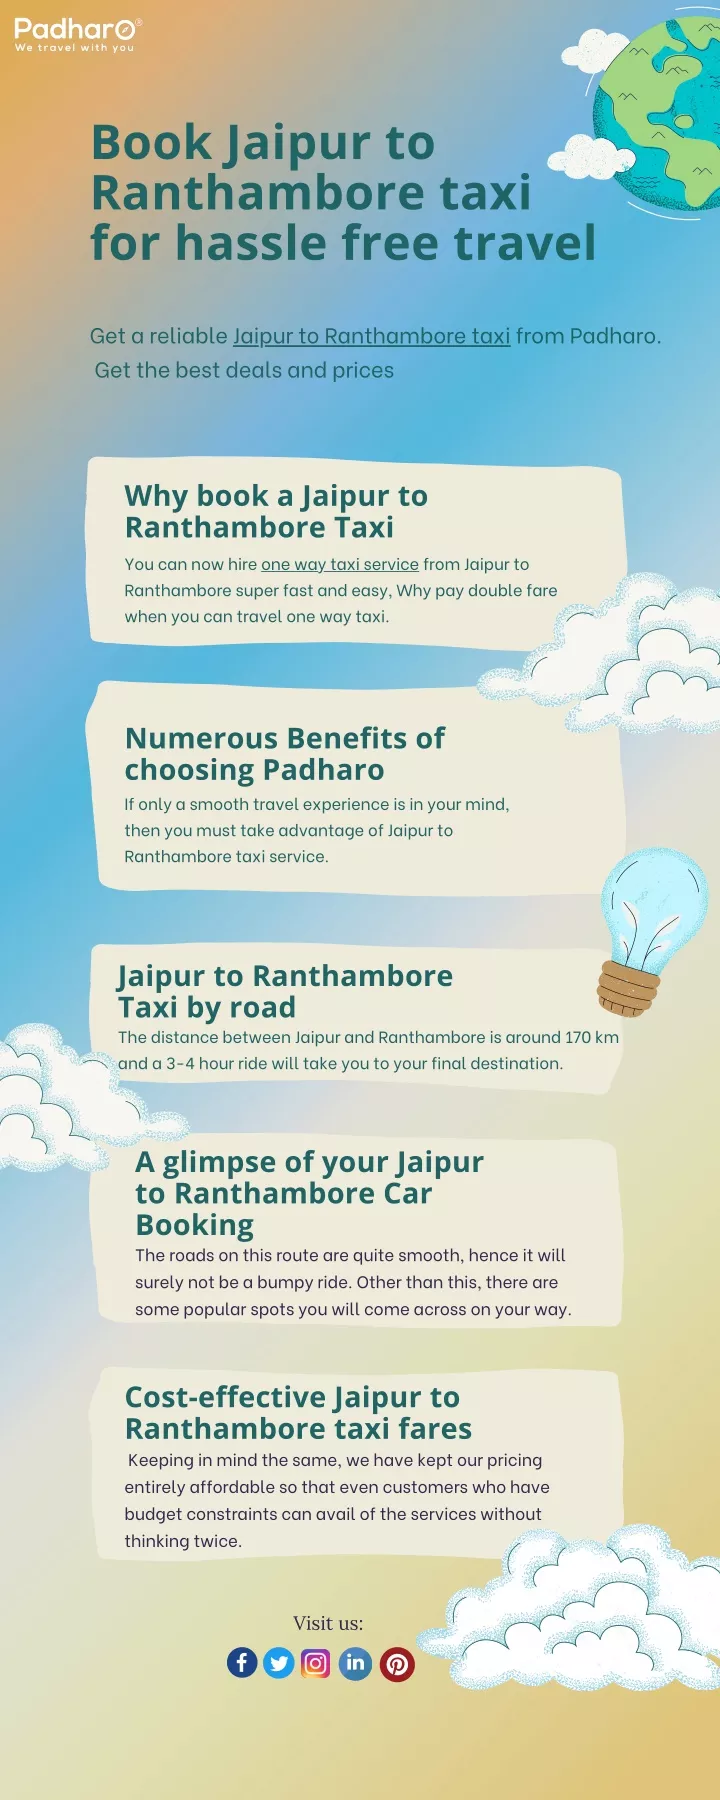 book jaipur to ranthambore taxi for hassle free